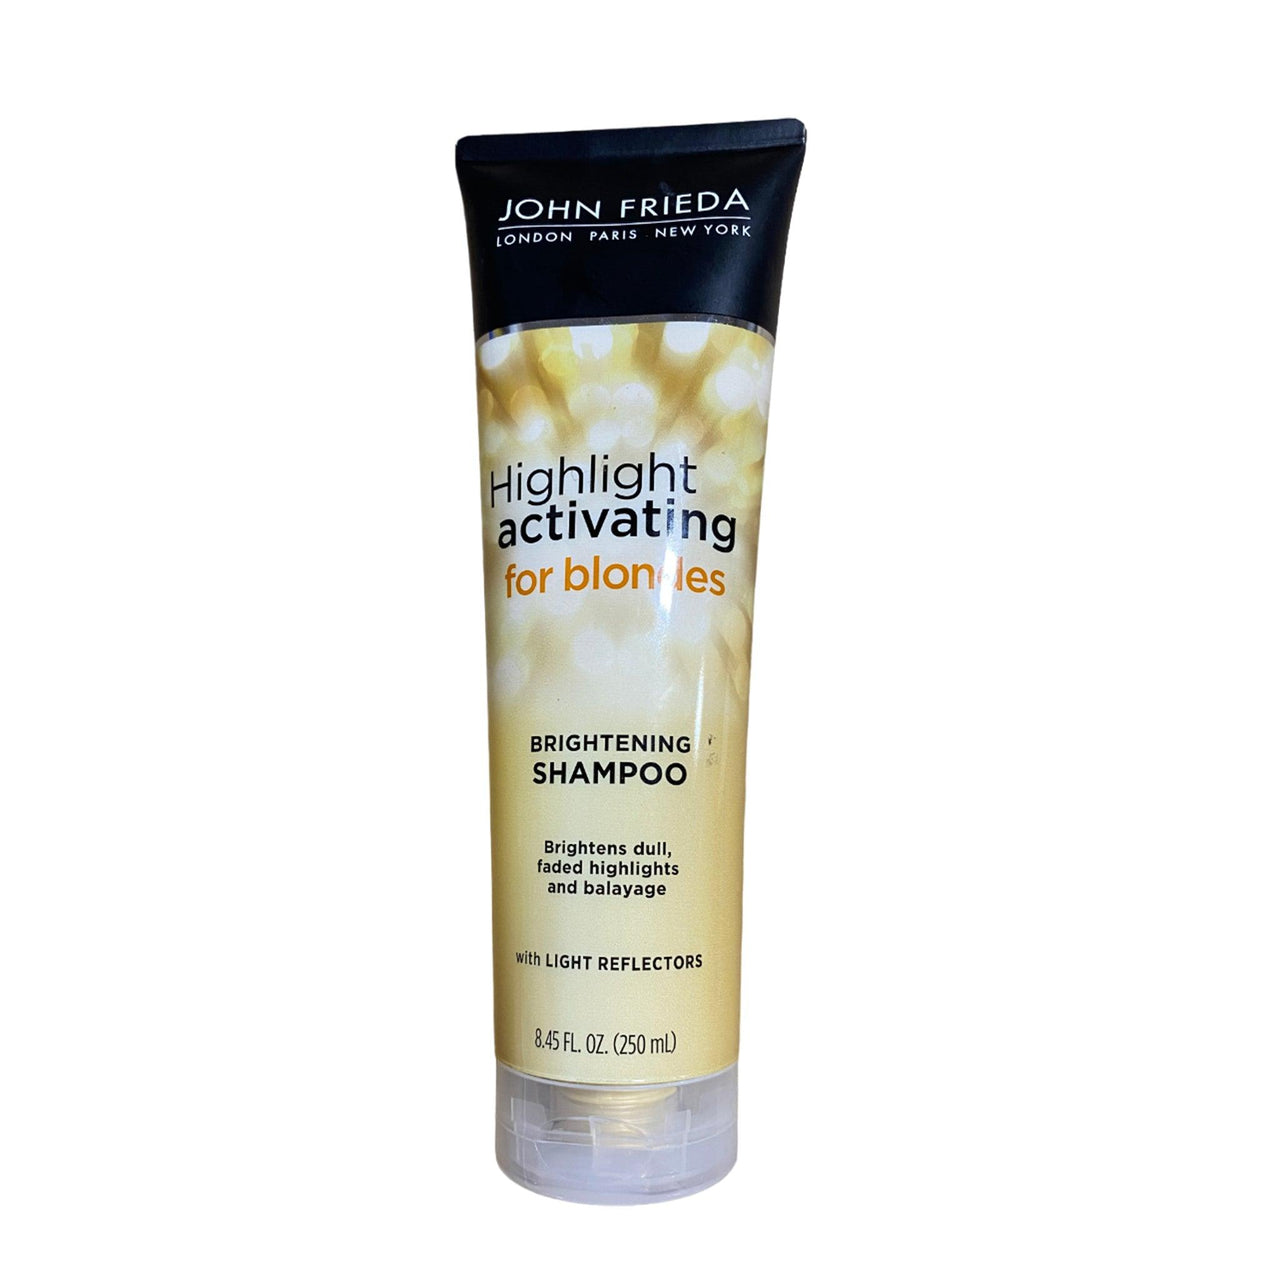 John Frieda Highlight Activating for Blondes Brrightening Shampoo (50 Pcs Box) - Discount Wholesalers Inc